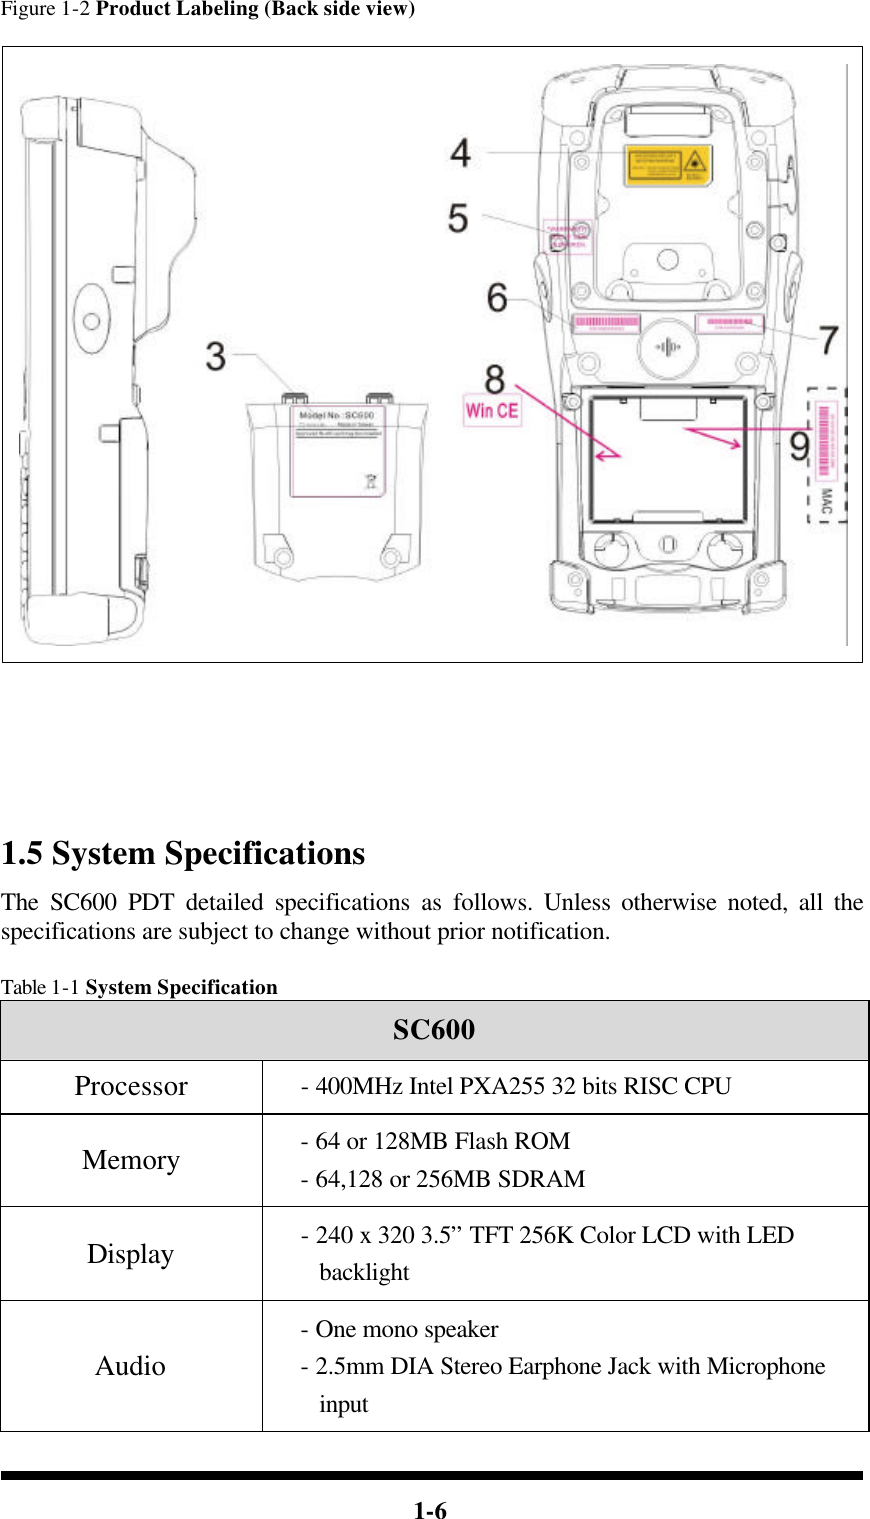  1-6 Figure 1-2 Product Labeling (Back side view)                      1.5 System Specifications The SC600 PDT detailed specifications as follows. Unless otherwise noted, all the specifications are subject to change without prior notification.  Table 1-1 System Specification SC600 Processor - 400MHz Intel PXA255 32 bits RISC CPU Memory - 64 or 128MB Flash ROM - 64,128 or 256MB SDRAM Display - 240 x 320 3.5” TFT 256K Color LCD with LED backlight Audio - One mono speaker   - 2.5mm DIA Stereo Earphone Jack with Microphone input 